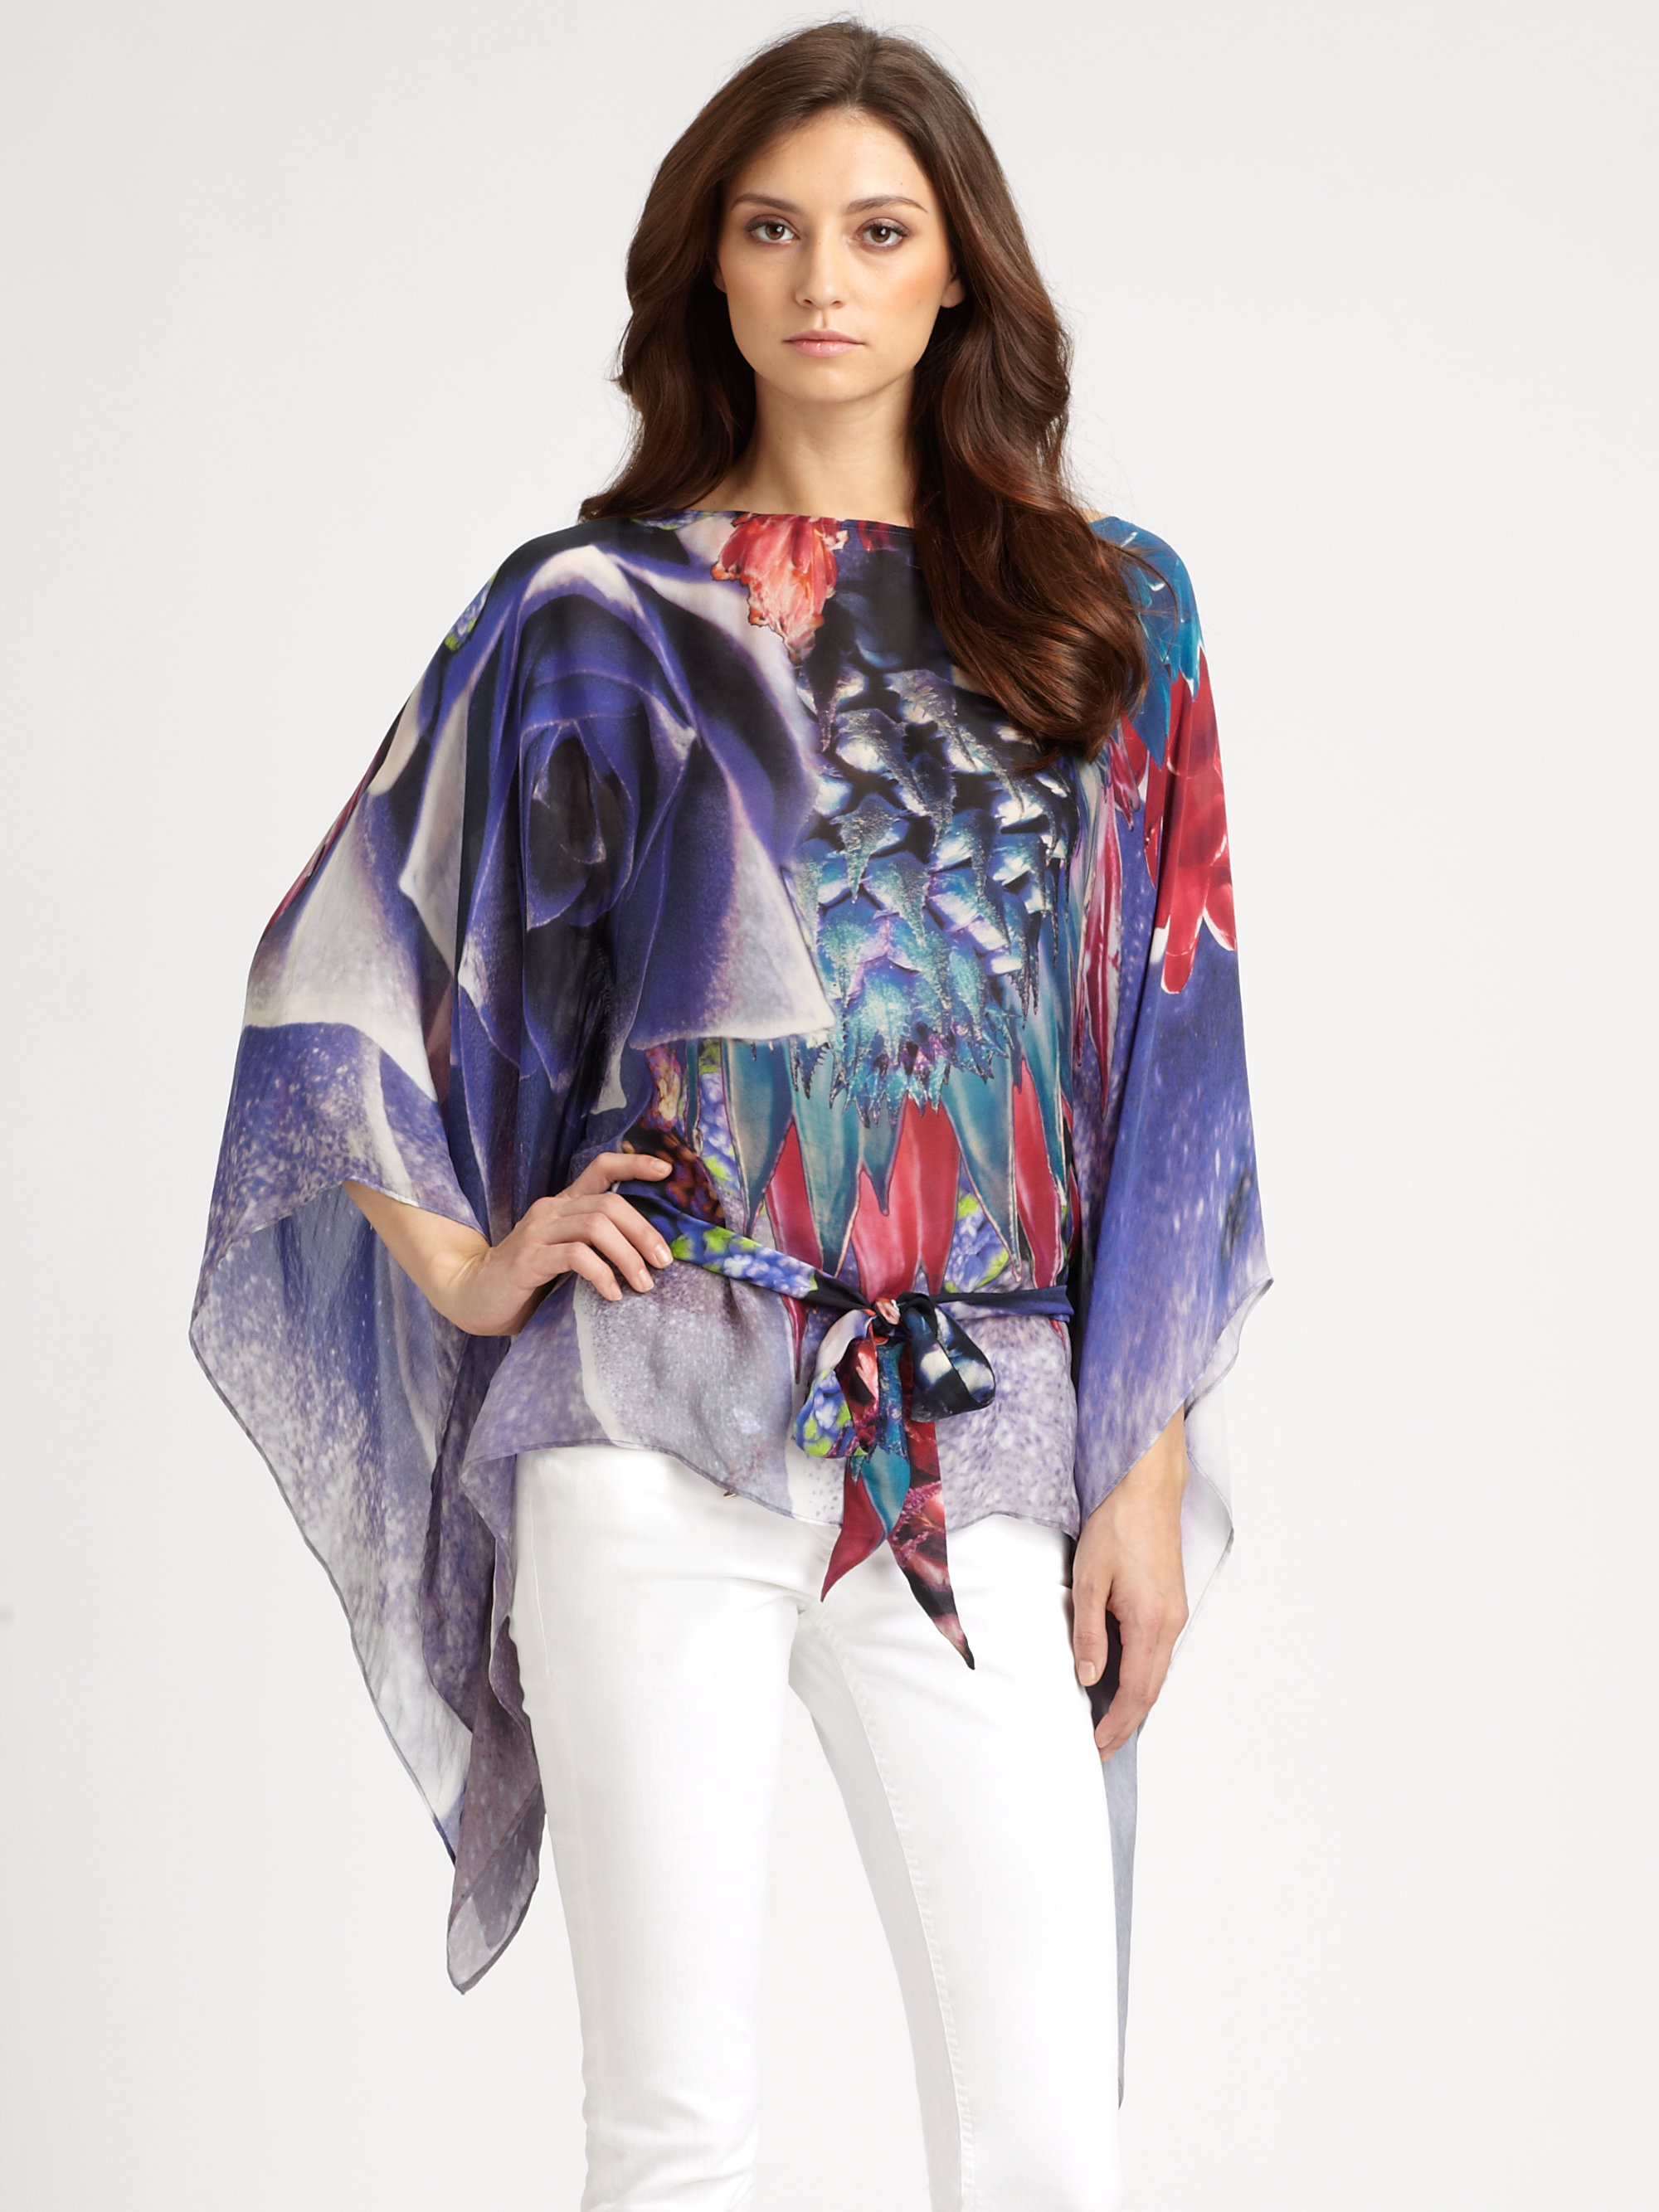 Ethereal Top Silk Chiffon Blouse Ethereal Blouse Roberto Cavalli Chiffon Blouse Lavender Chiffon Blouse Vintage Roberto Cavalli